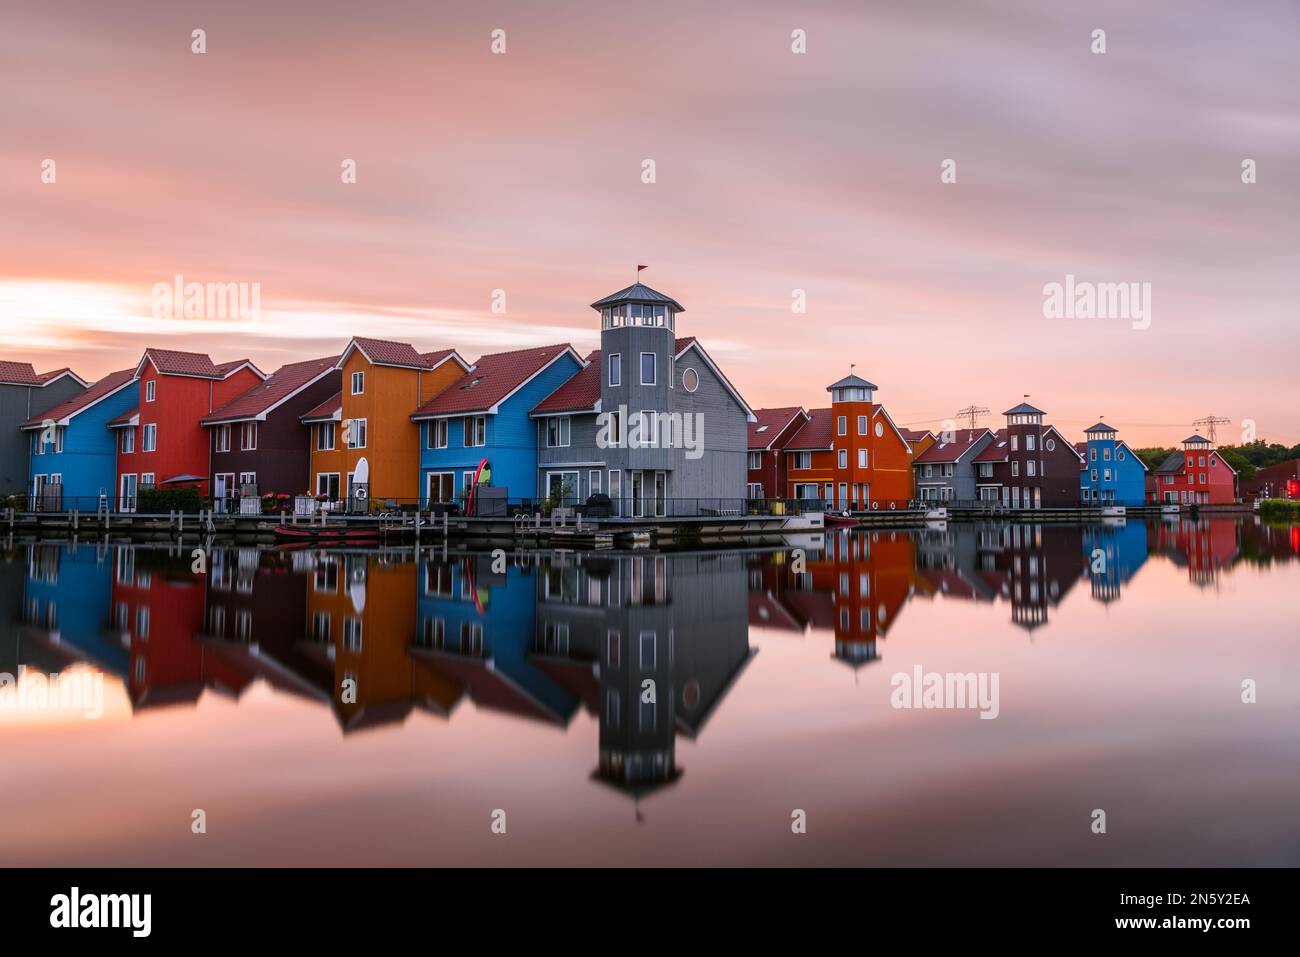 Multicolour harbourside row houses at sunset. Long exposure and reflection in water. Stock Photo